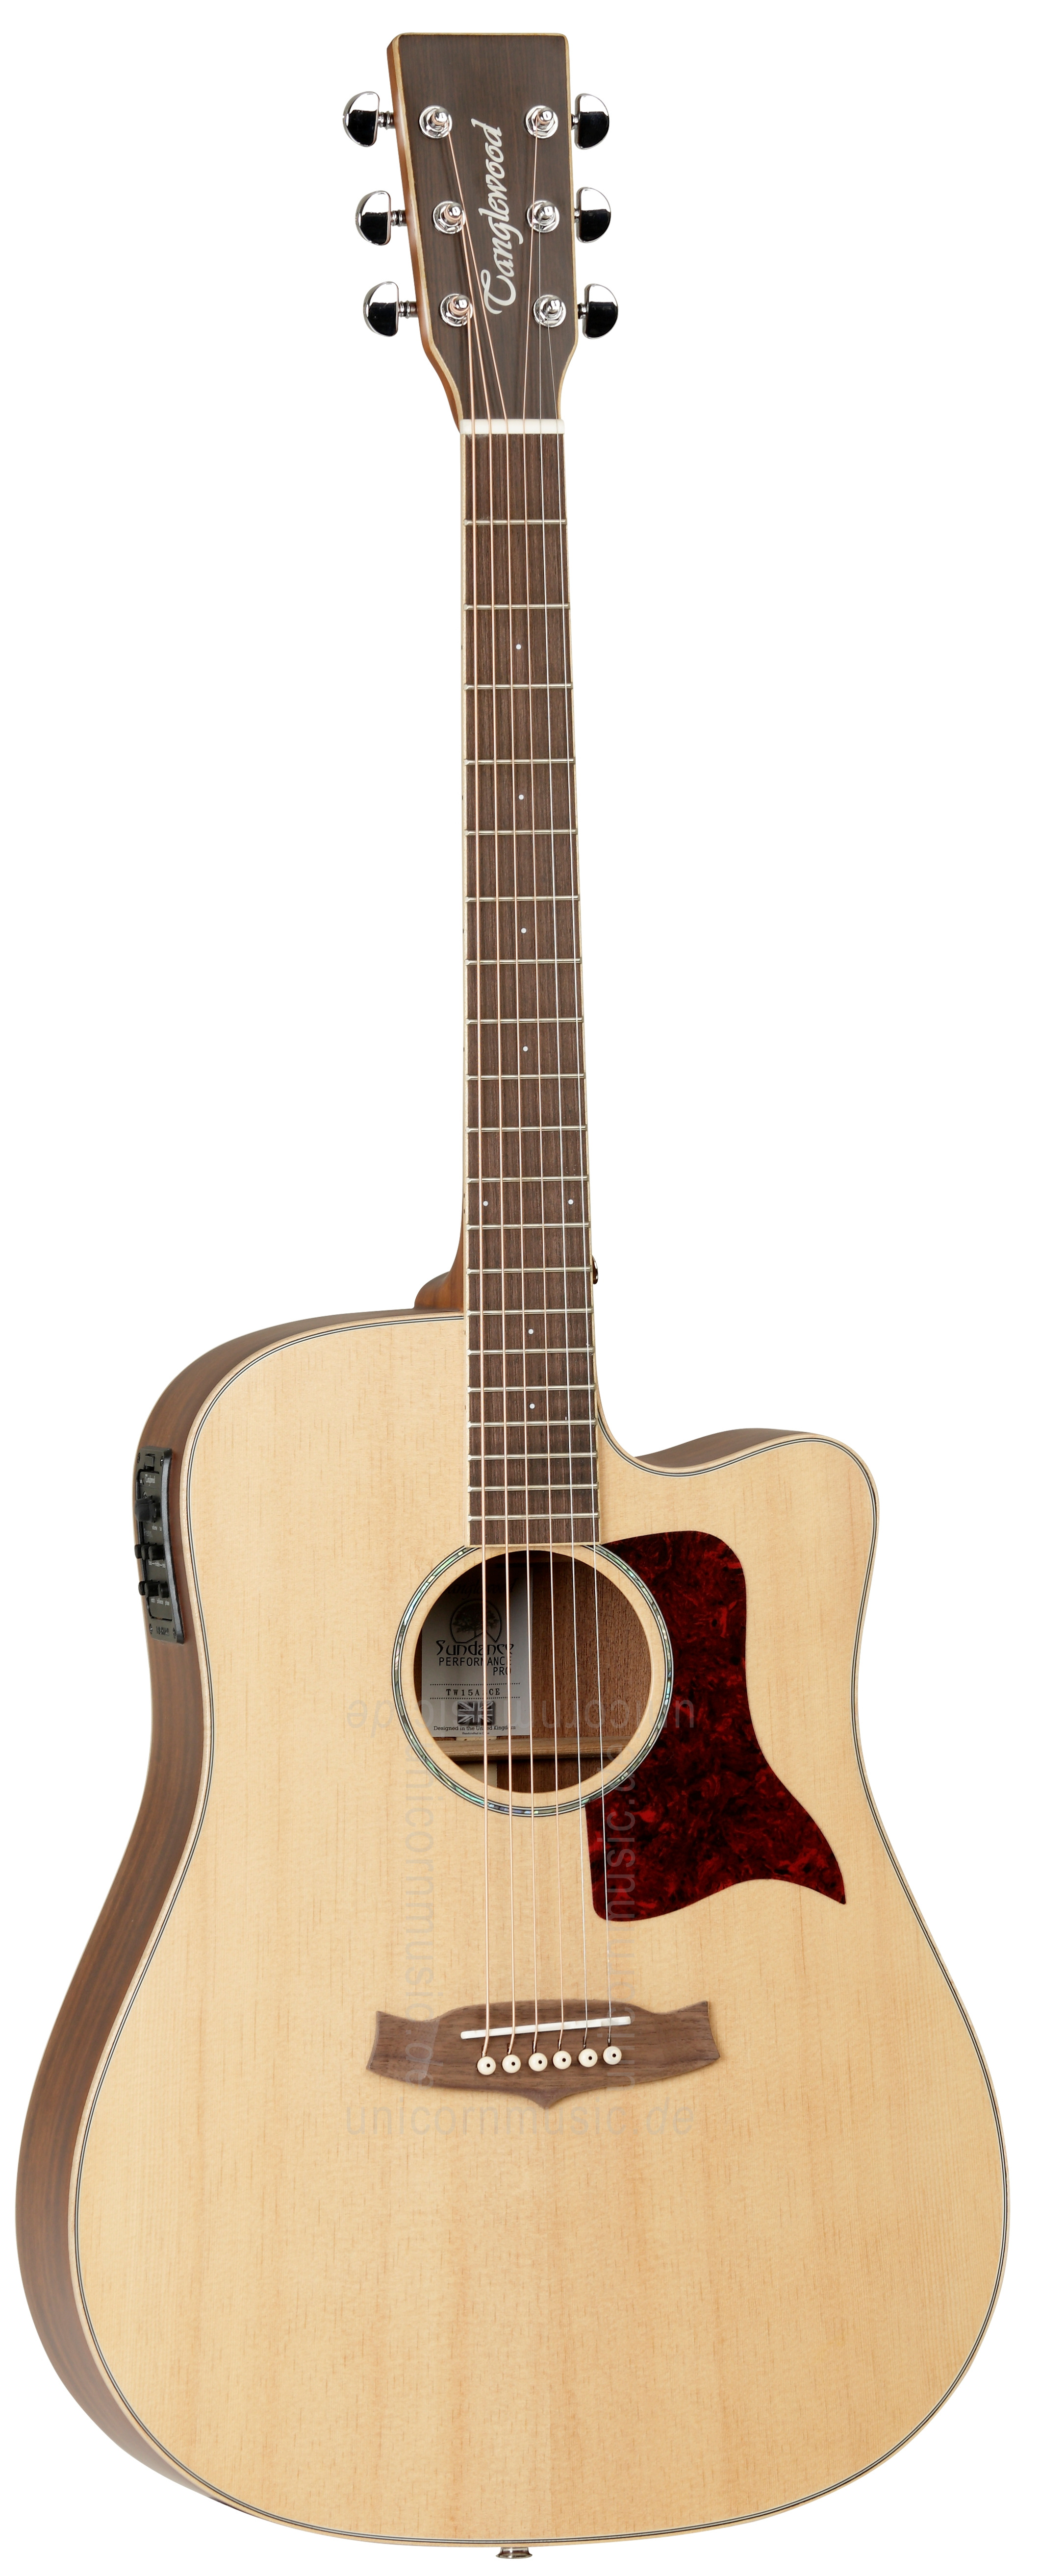 to article description / price Acoustic Guitar TANGLEWOOD TW15/ASM CE  - Sundance Series - Mahagoni - Dreadnought - all solid